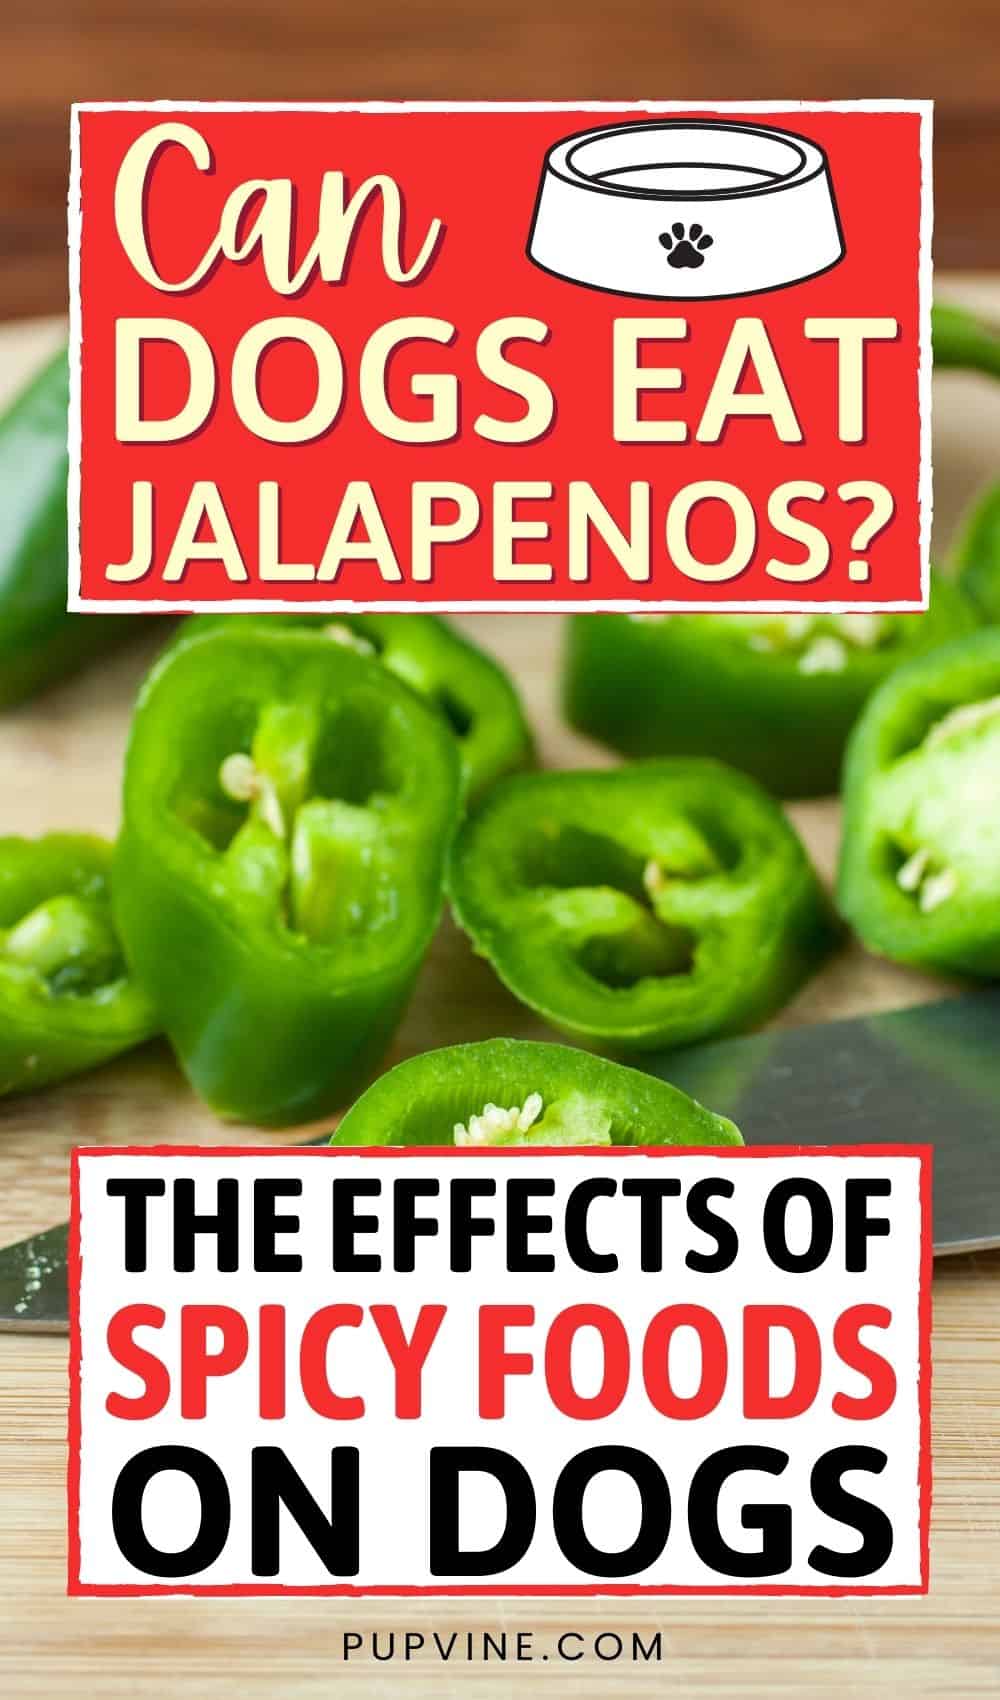 Can Dogs Eat Jalapenos The Effects Of Spicy Foods On Dogs